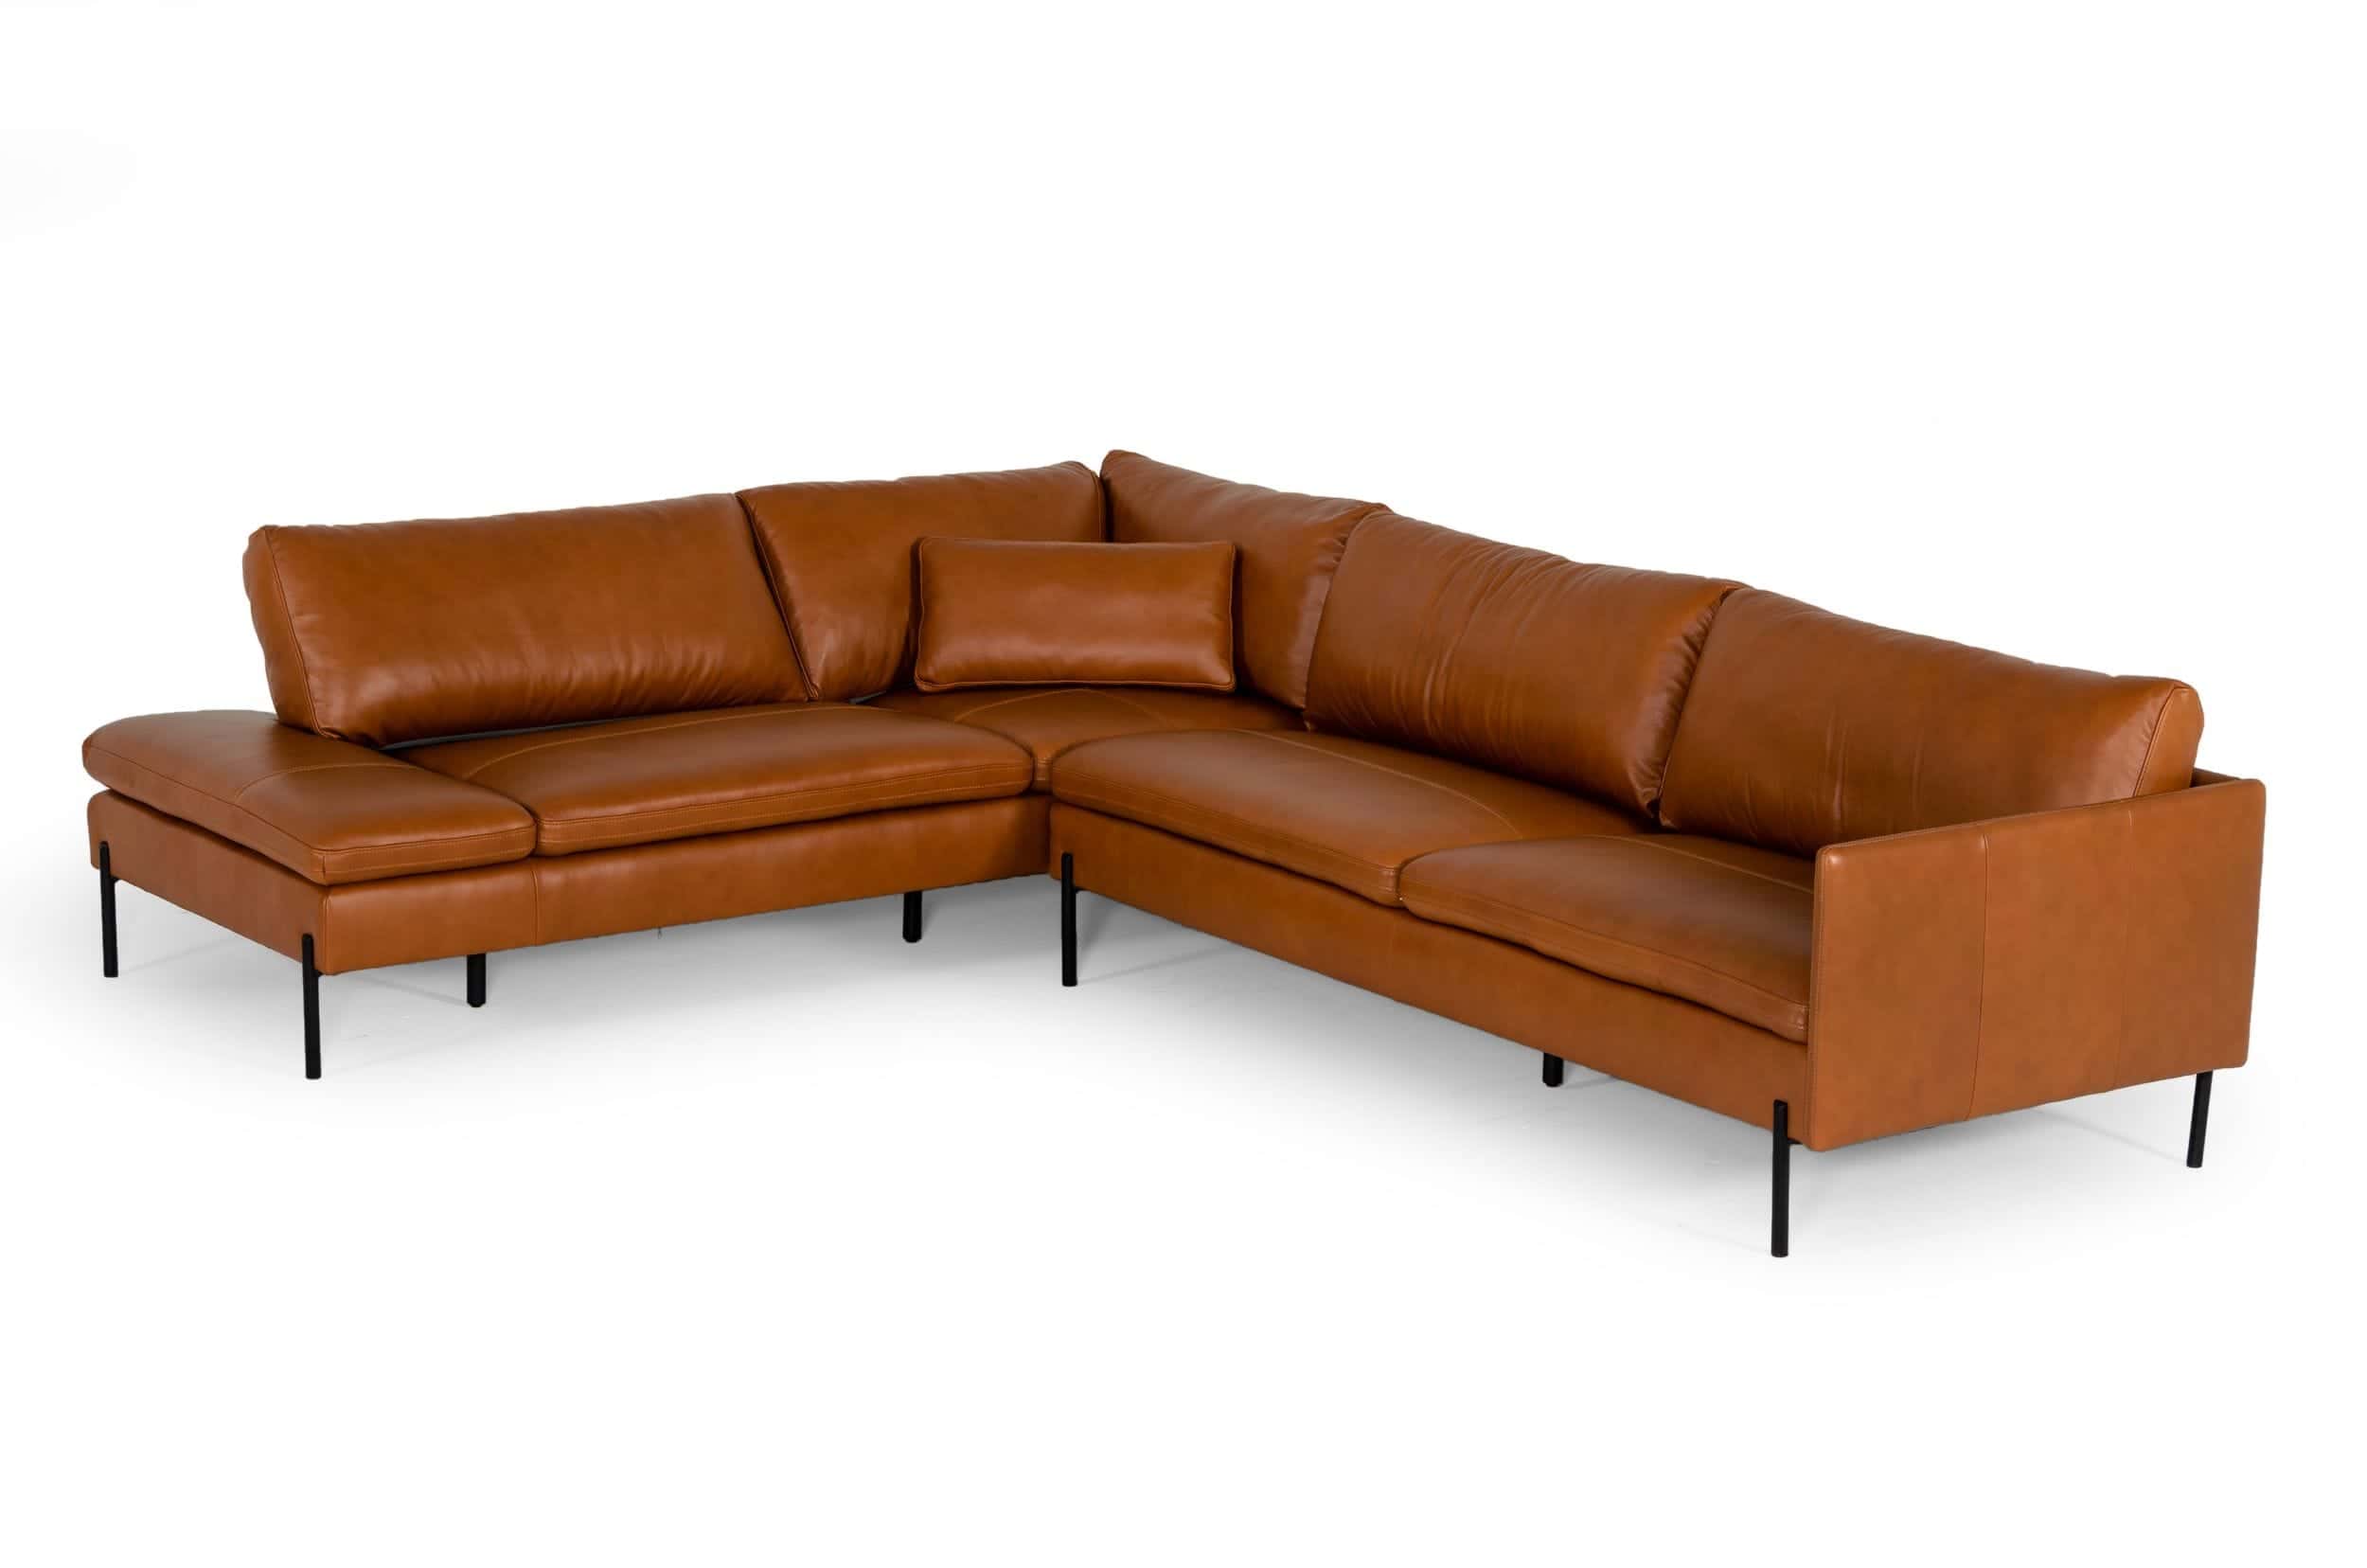 Divani Casa Sherry - Modern Cognac LAF Chaise Leather Sectional Sofa by VIG  Furniture